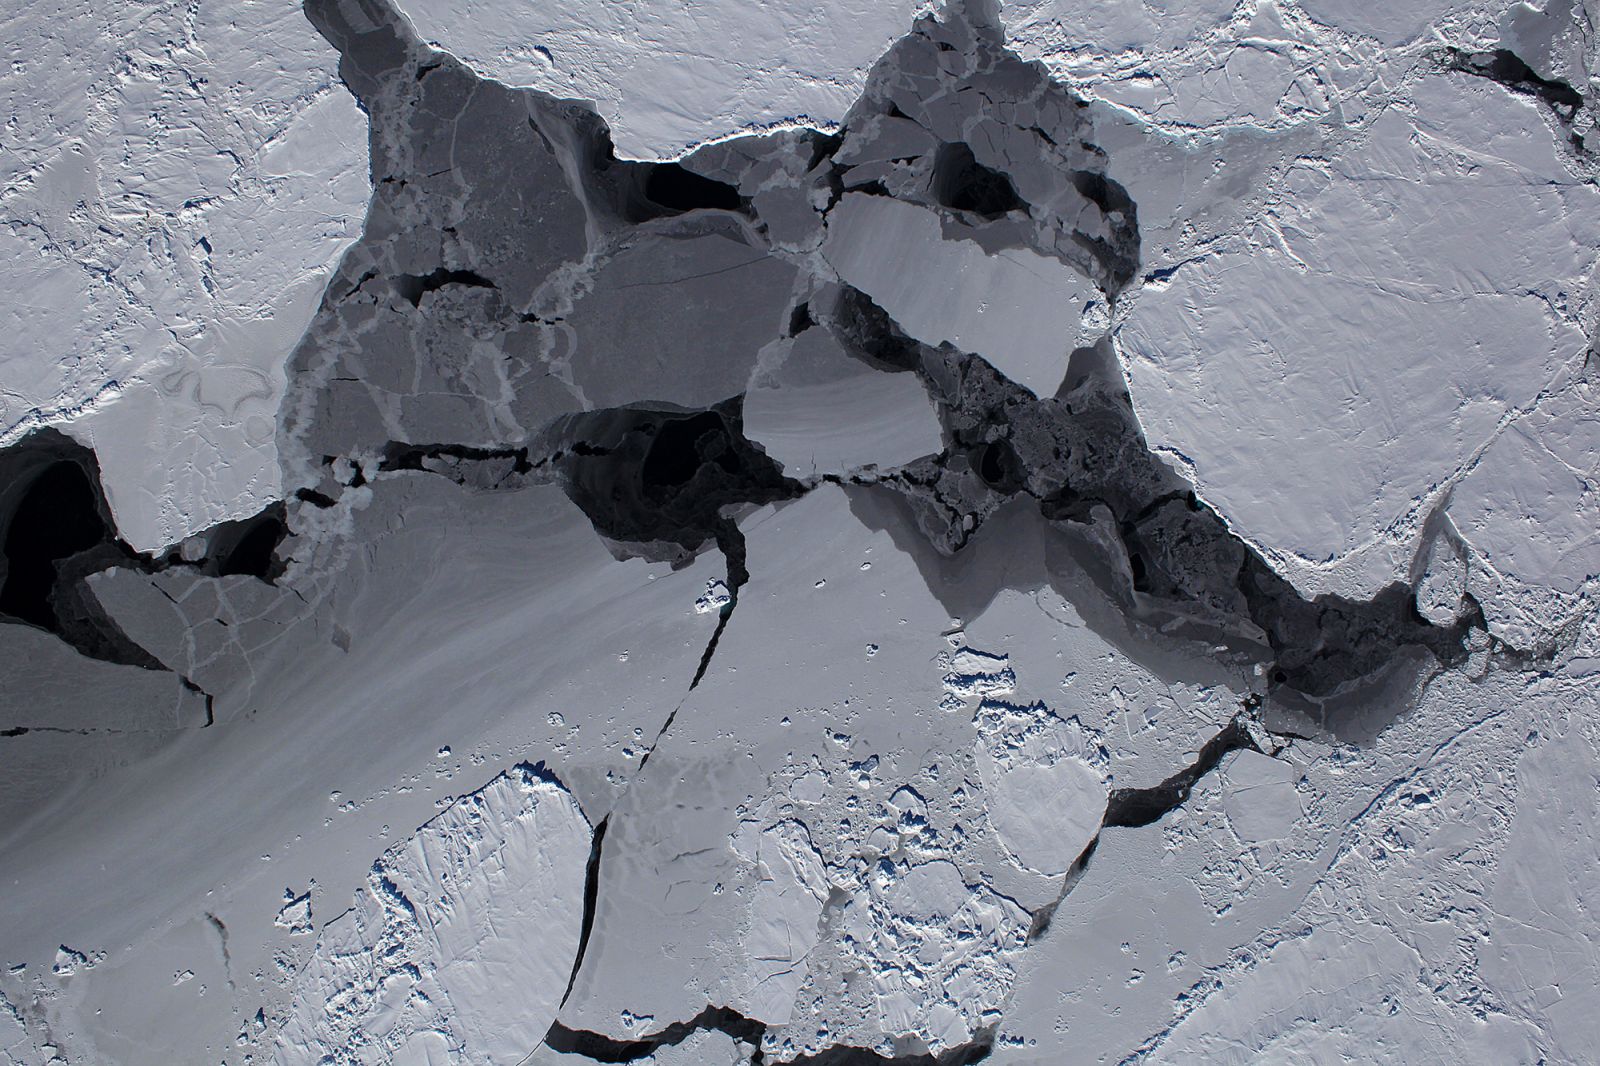 Mathematicians Prove Melting Ice Stays Smooth